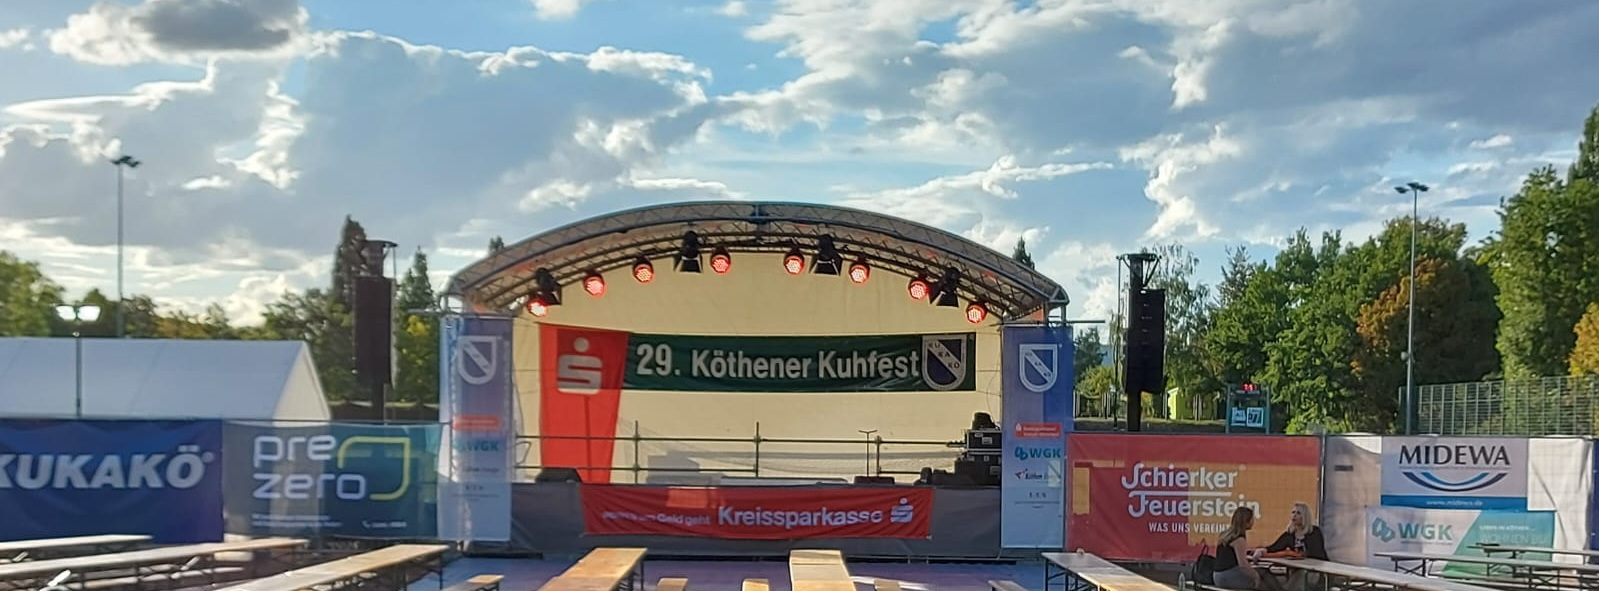 Kuhfest 3